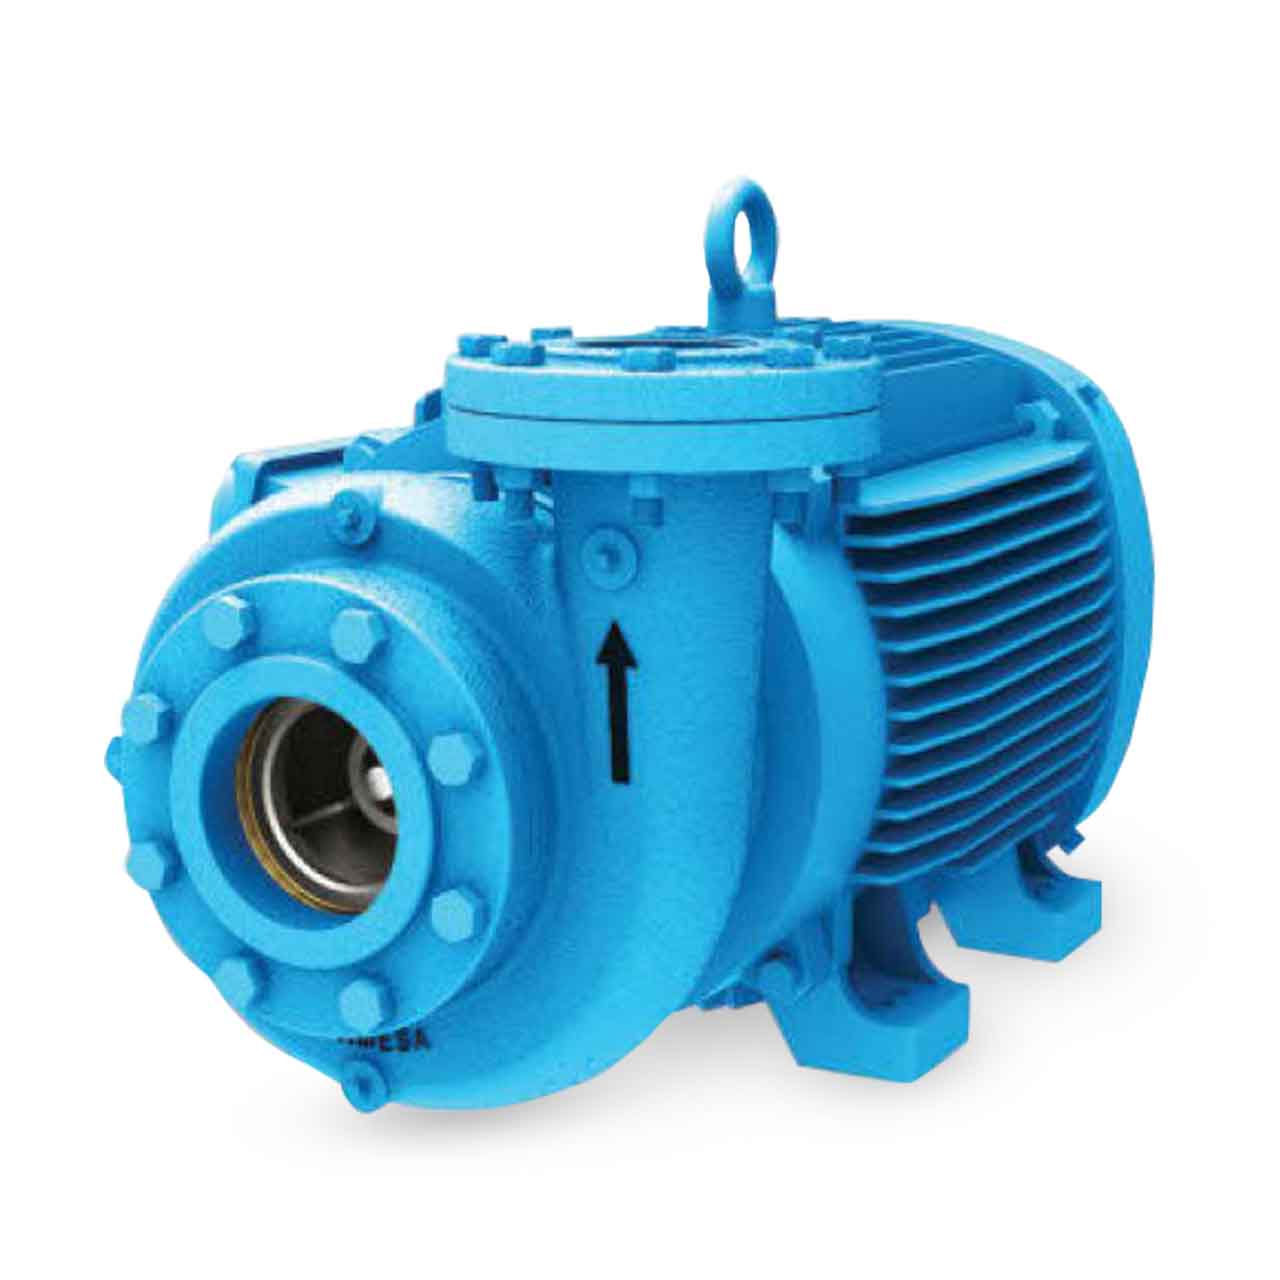 1.5 230/460V 1.5 x 1.25 3450 RPM 3 Phase 1.5 hp Barmesa Pumps 70080062 End-Suction Centrifugal Stainless Steel-CD Series Model CD120 Cast Iron/Steel 2